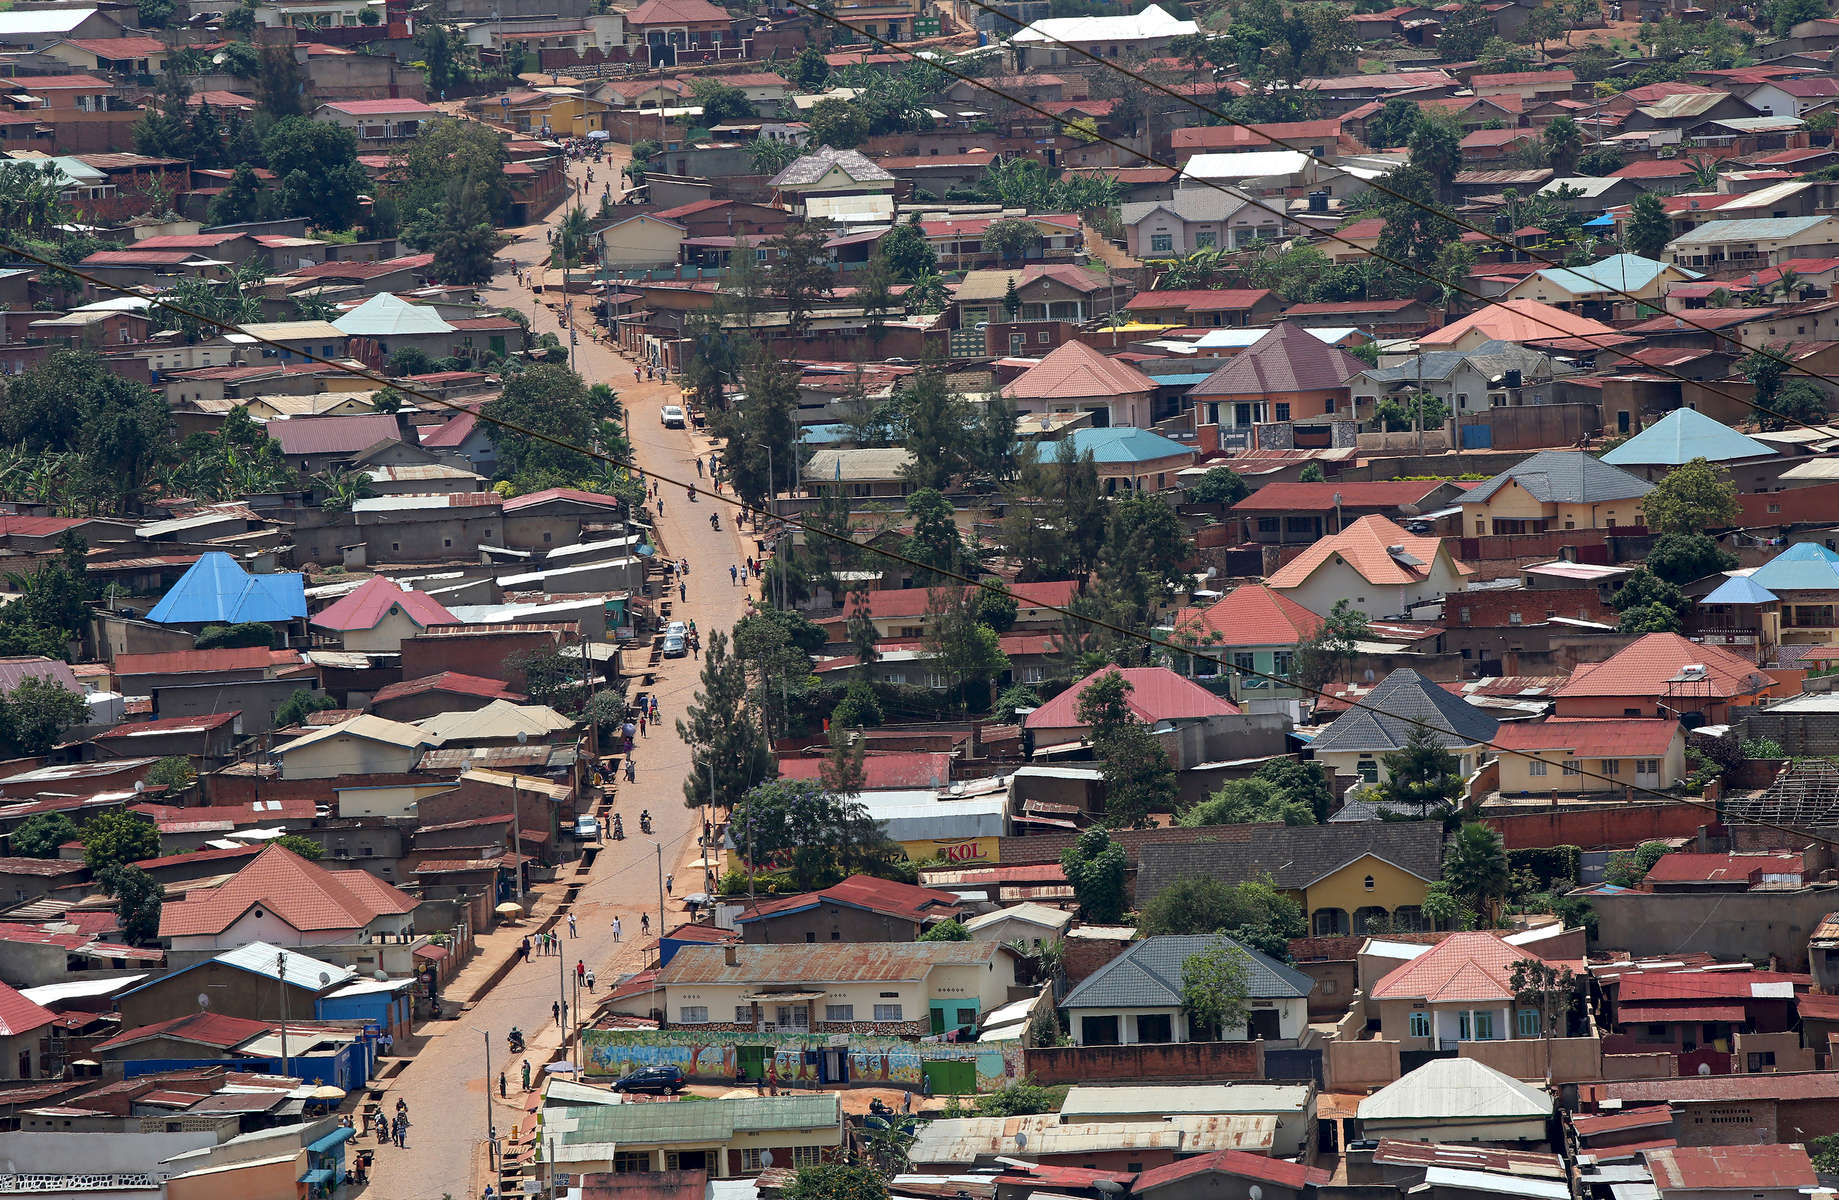 A road snakes through Kigali, Rwanda on November 19, 2017. The land-locked African nation relies on hydropower and wood-burning for its energy, emissions from which combine with automotive and bike exhaust to form a blanket of pollution. While Rwanda is making an effort to source more climate-friendly fuels, the country has already experienced temperature increases higher than the global average, which are projected to continue to rise by 2.5 degrees C from its 1970 temperatures, by the 2050s. Nearly half of all Rwandans live in poverty, relying on small-scale farming for survival without gas or electricity. With so many women and children spending hours of the day foraging for wood used for cooking and light, often damaging their eyes, lungs, the forests and atmosphere, a little inventiveness helps. Enter cow and enter pig -- not just as a source of food, but also the heat needed to cook it. Or more specifically, their poo -- the fuel fed to a biogas digester, a tank that converts organic waste into methane. 